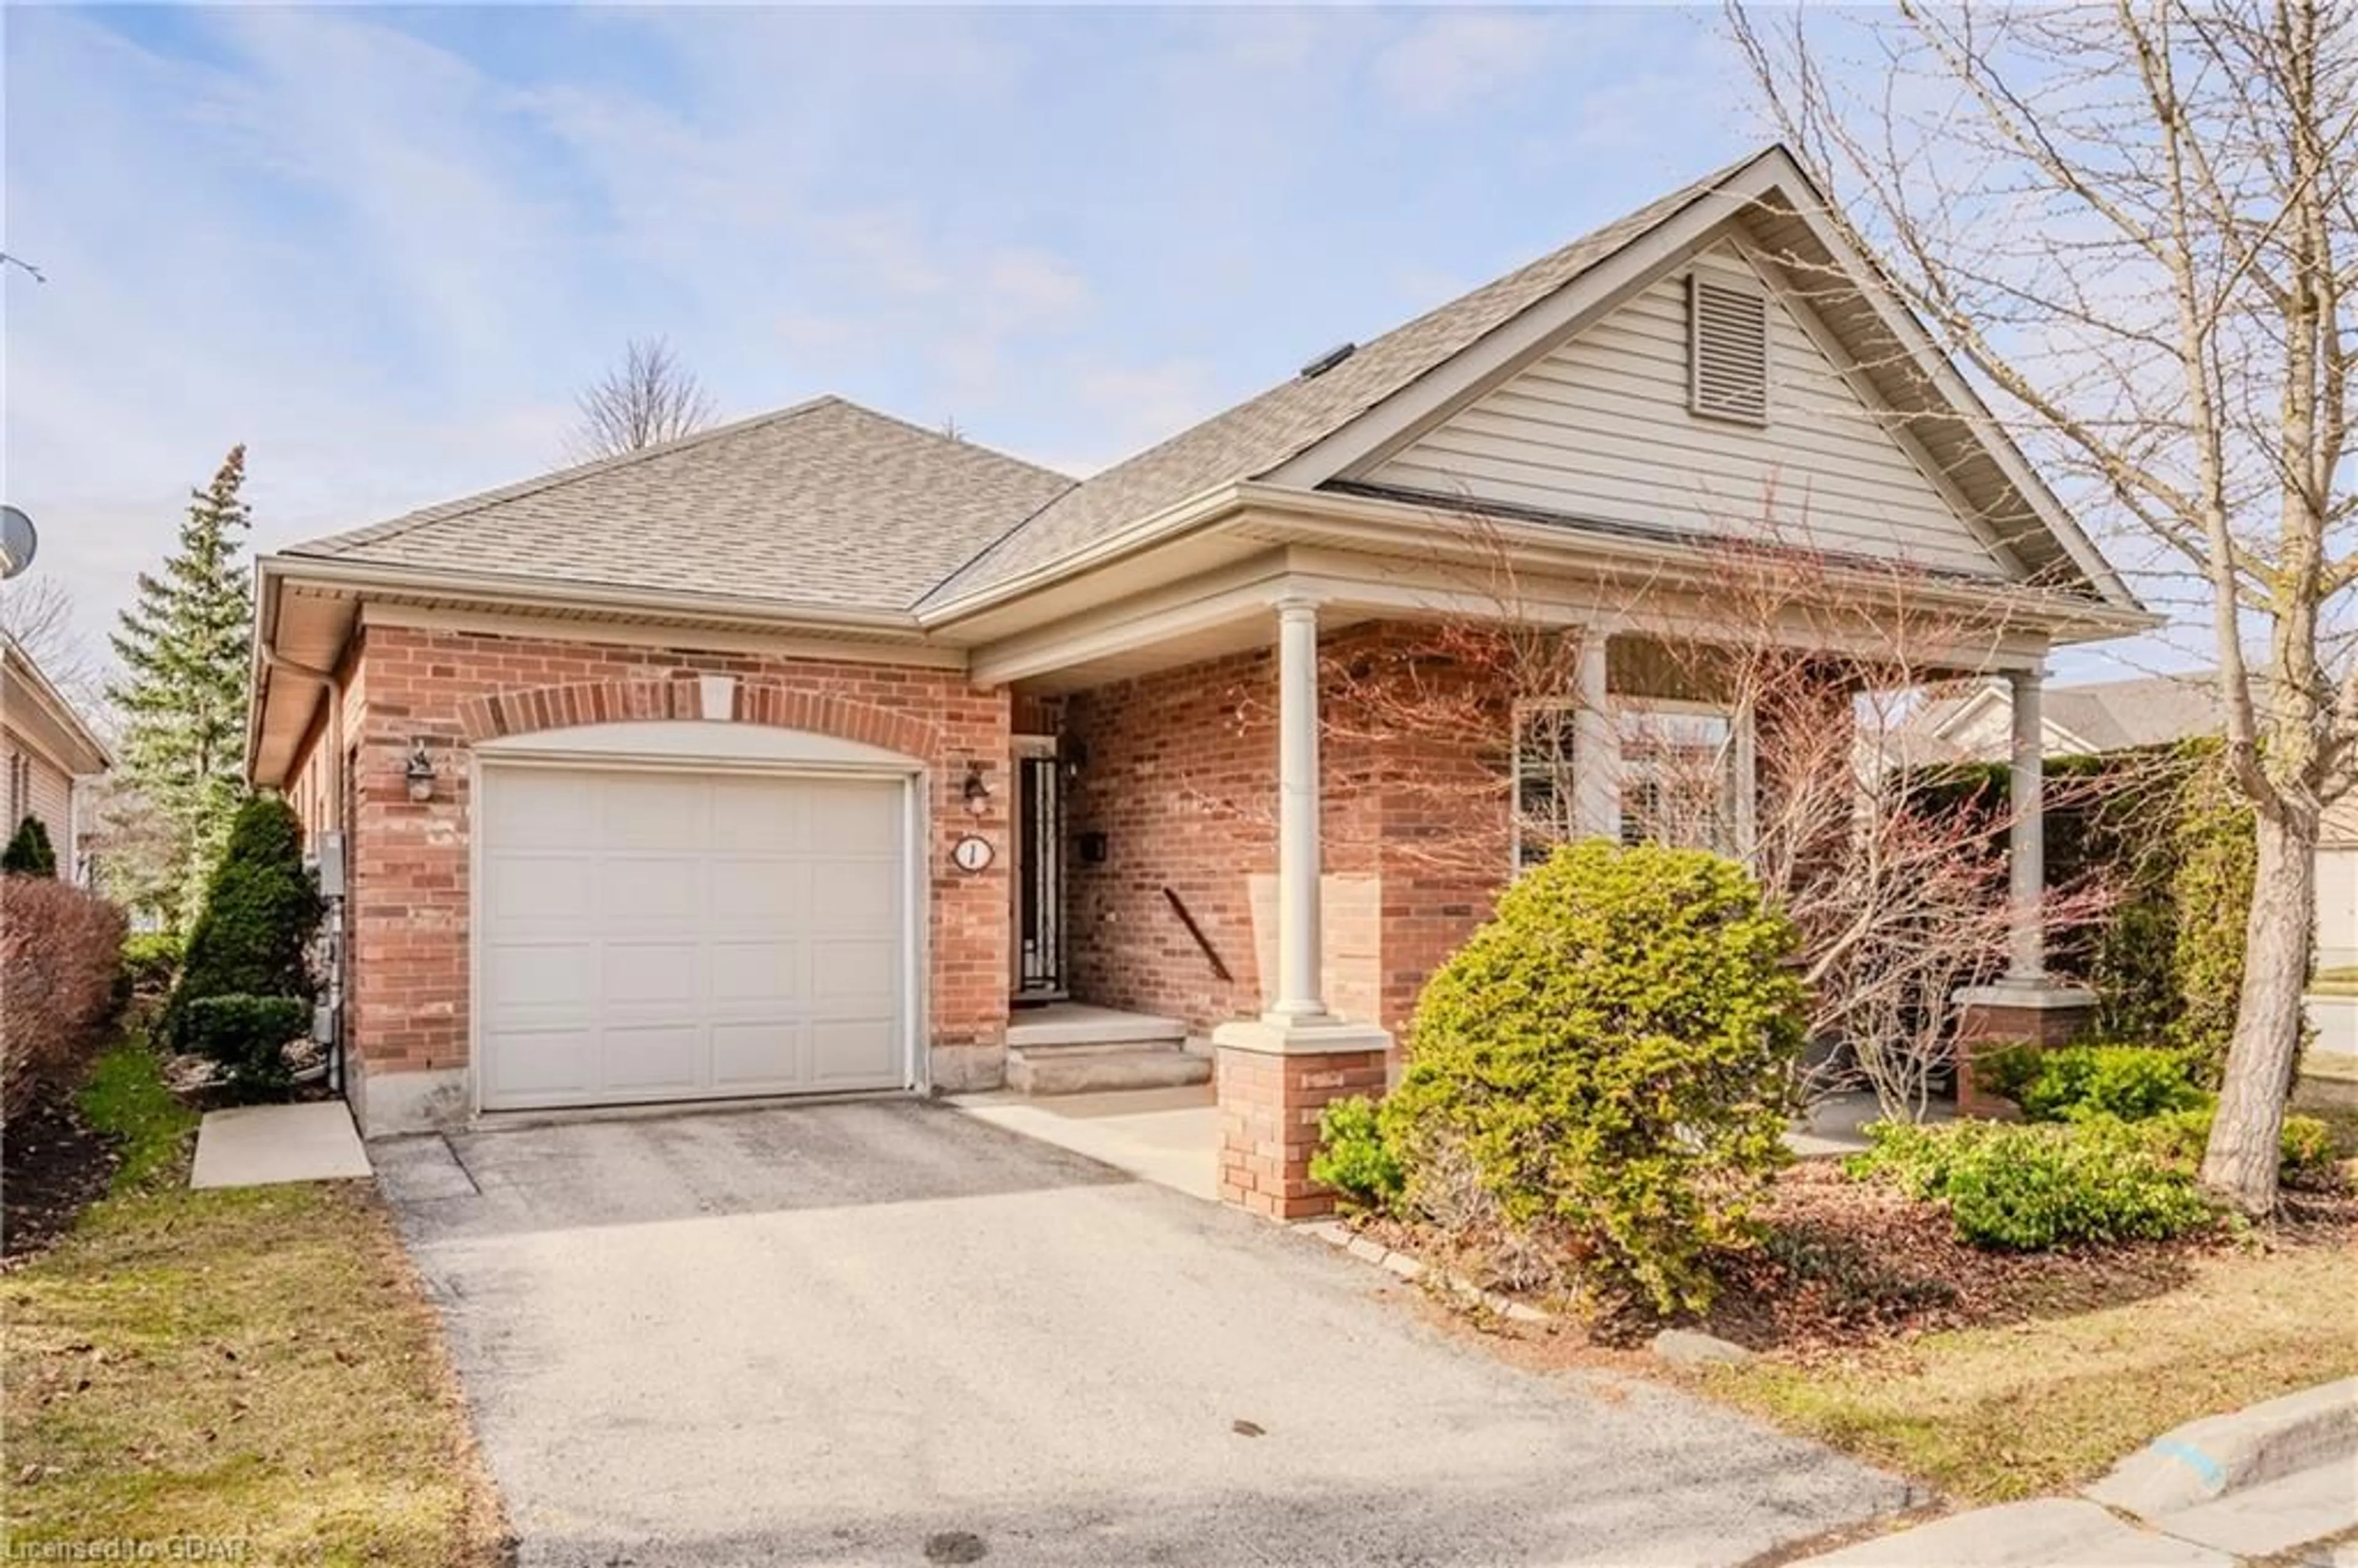 Home with brick exterior material for 1 Winterberry Lane, Guelph Ontario N1G 4X7